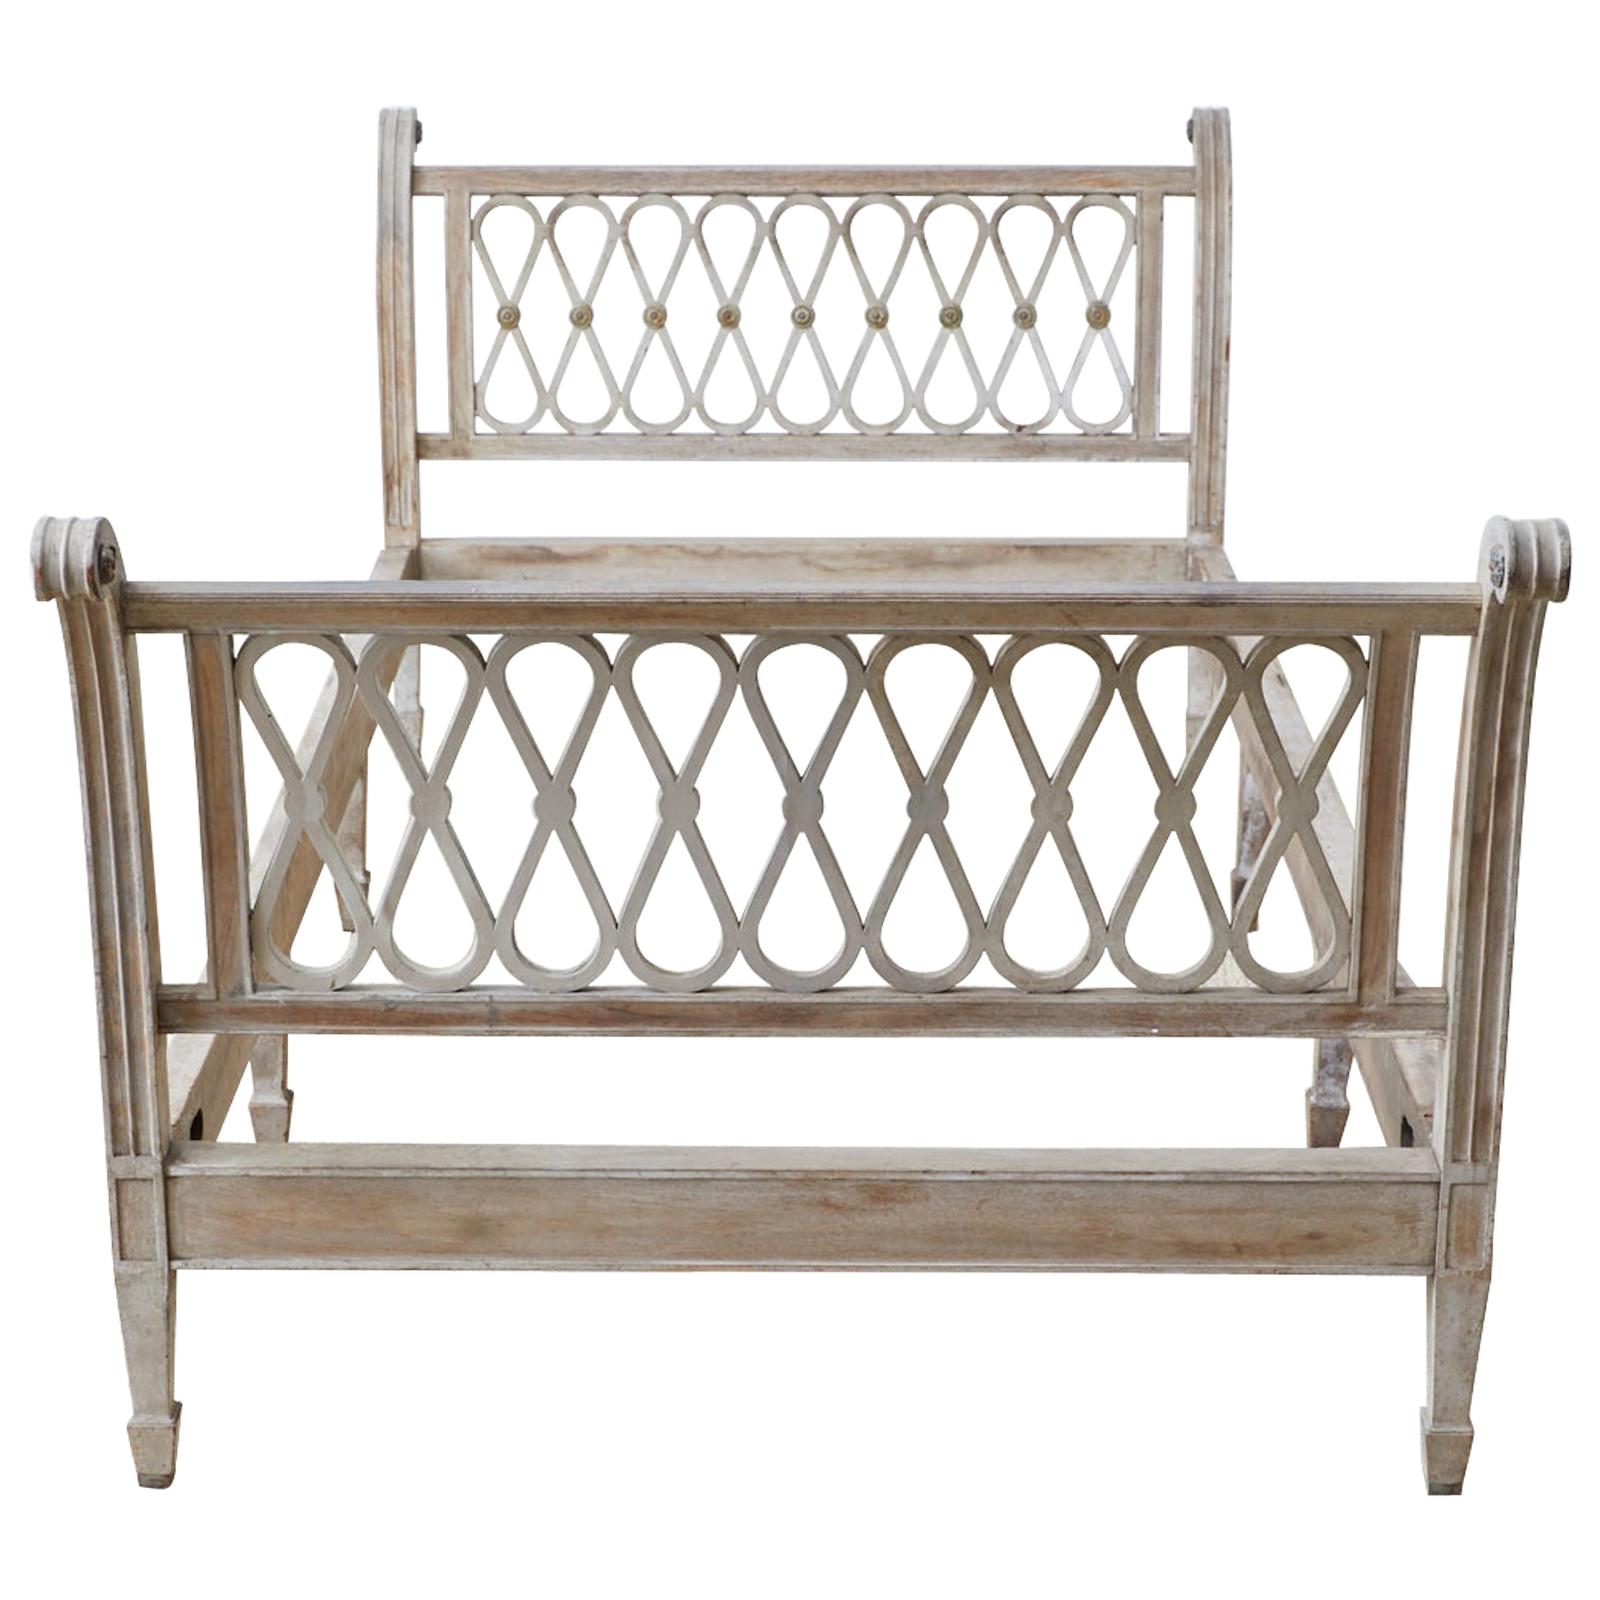 Neoclassical Hollywood Regency French Bed Frame